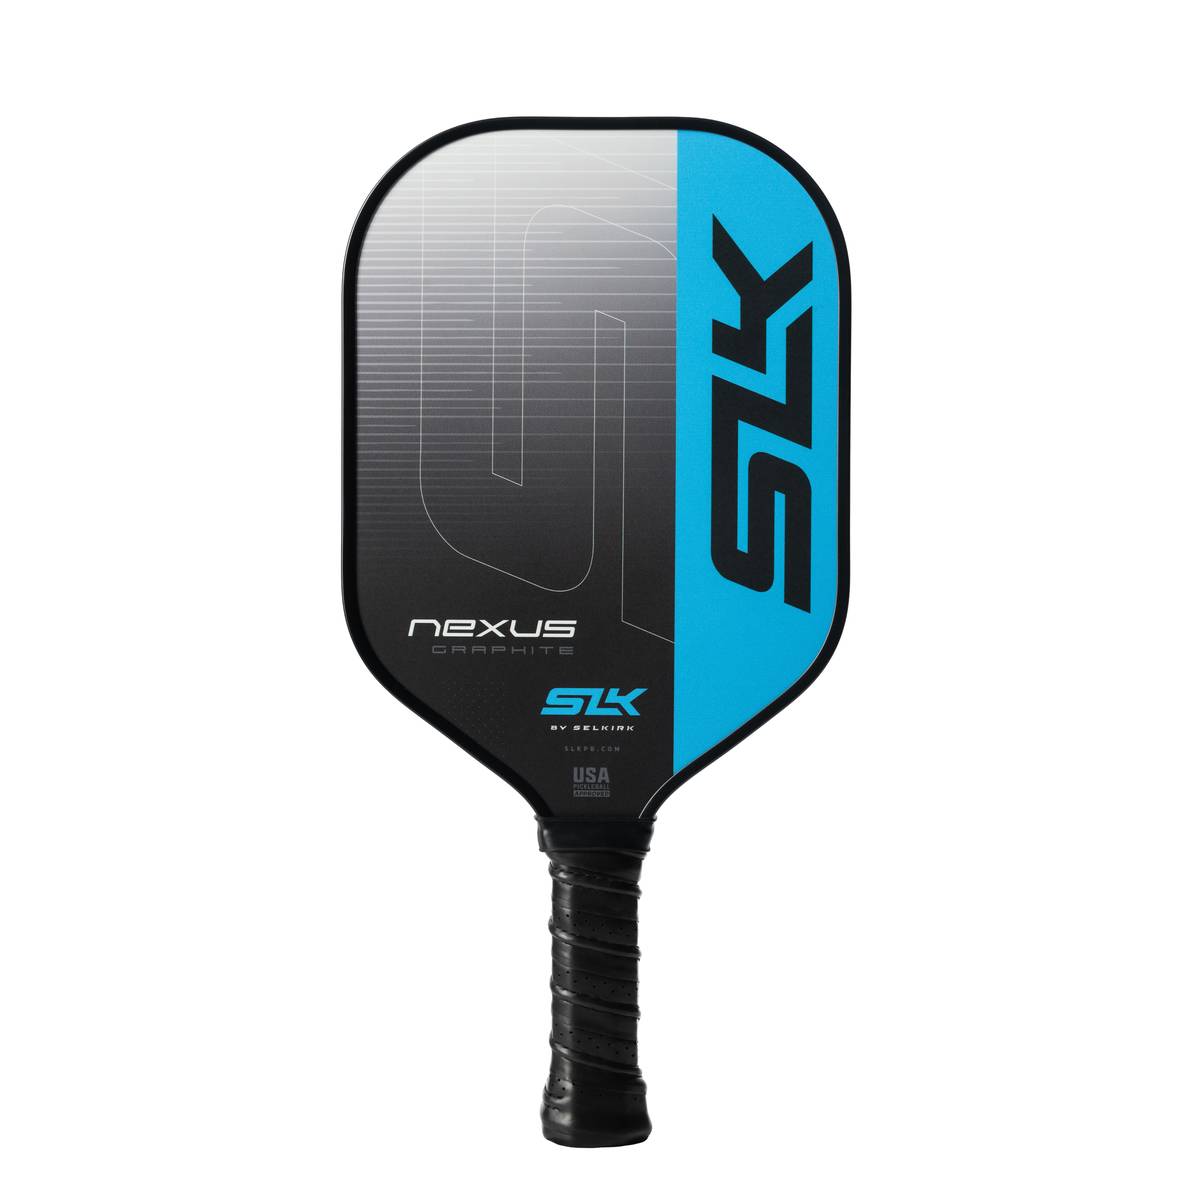 The SLK Nexus Blue Pickleball Paddle by Selkirk is shown on a white background.